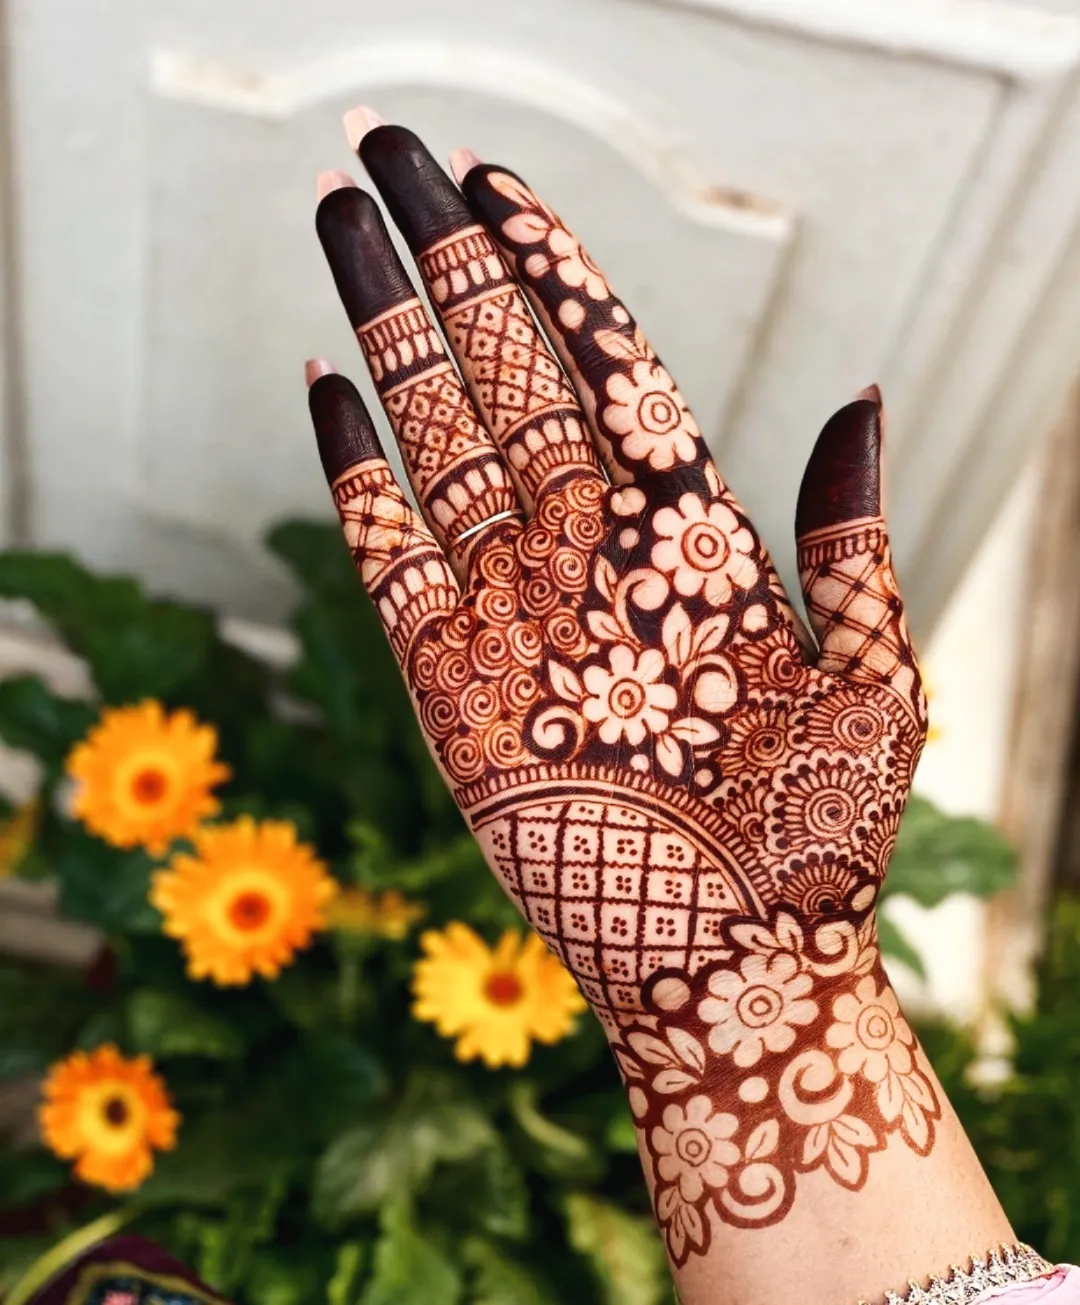 New Collection Of Modern Mehndi Designs For Hands - Glossnglitters